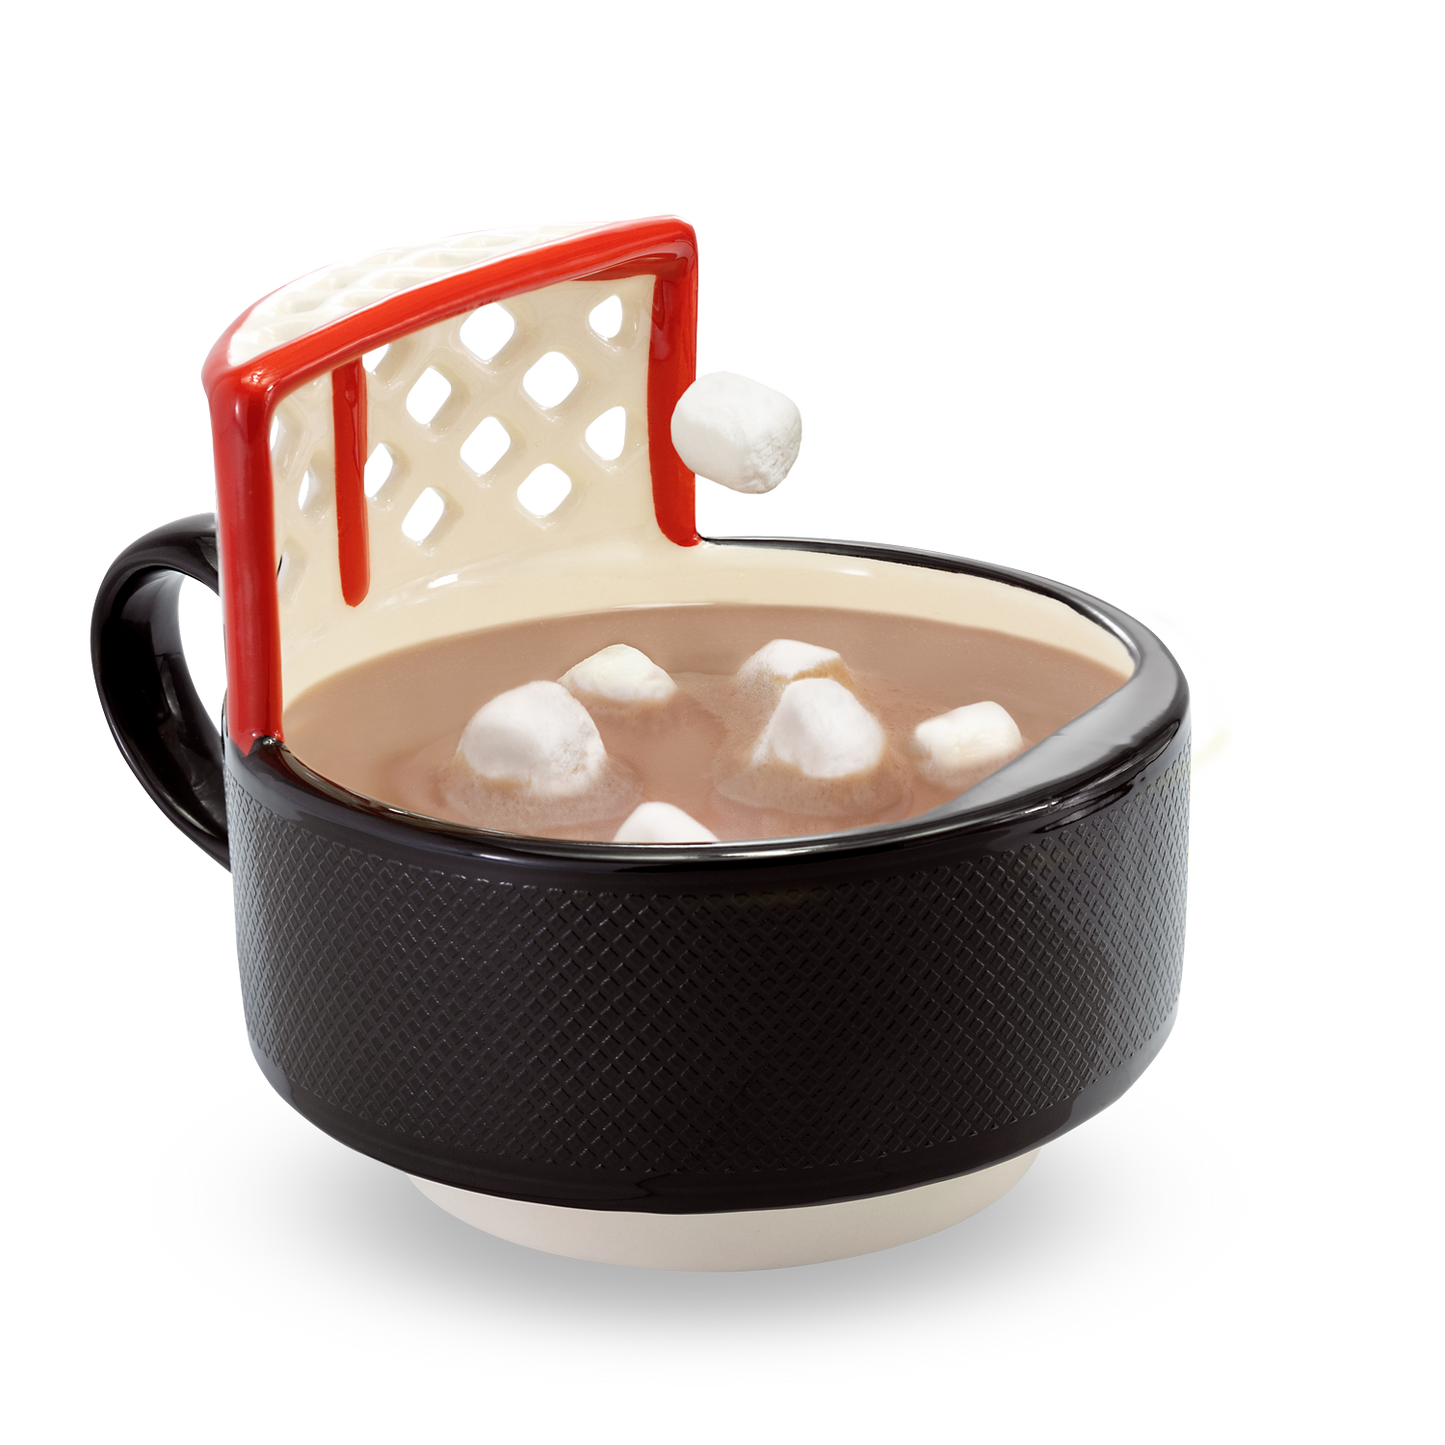 The Hockey Mug with a Net! START YOUR MORNINGS WITH FUN! Play with your food with this original hockey mug with an attached net. Perfect for scoring mini marshmallows into cocoa, cereal into milk, crackers into soup, or toppings onto ice cream! Something to root for in your morning routine!